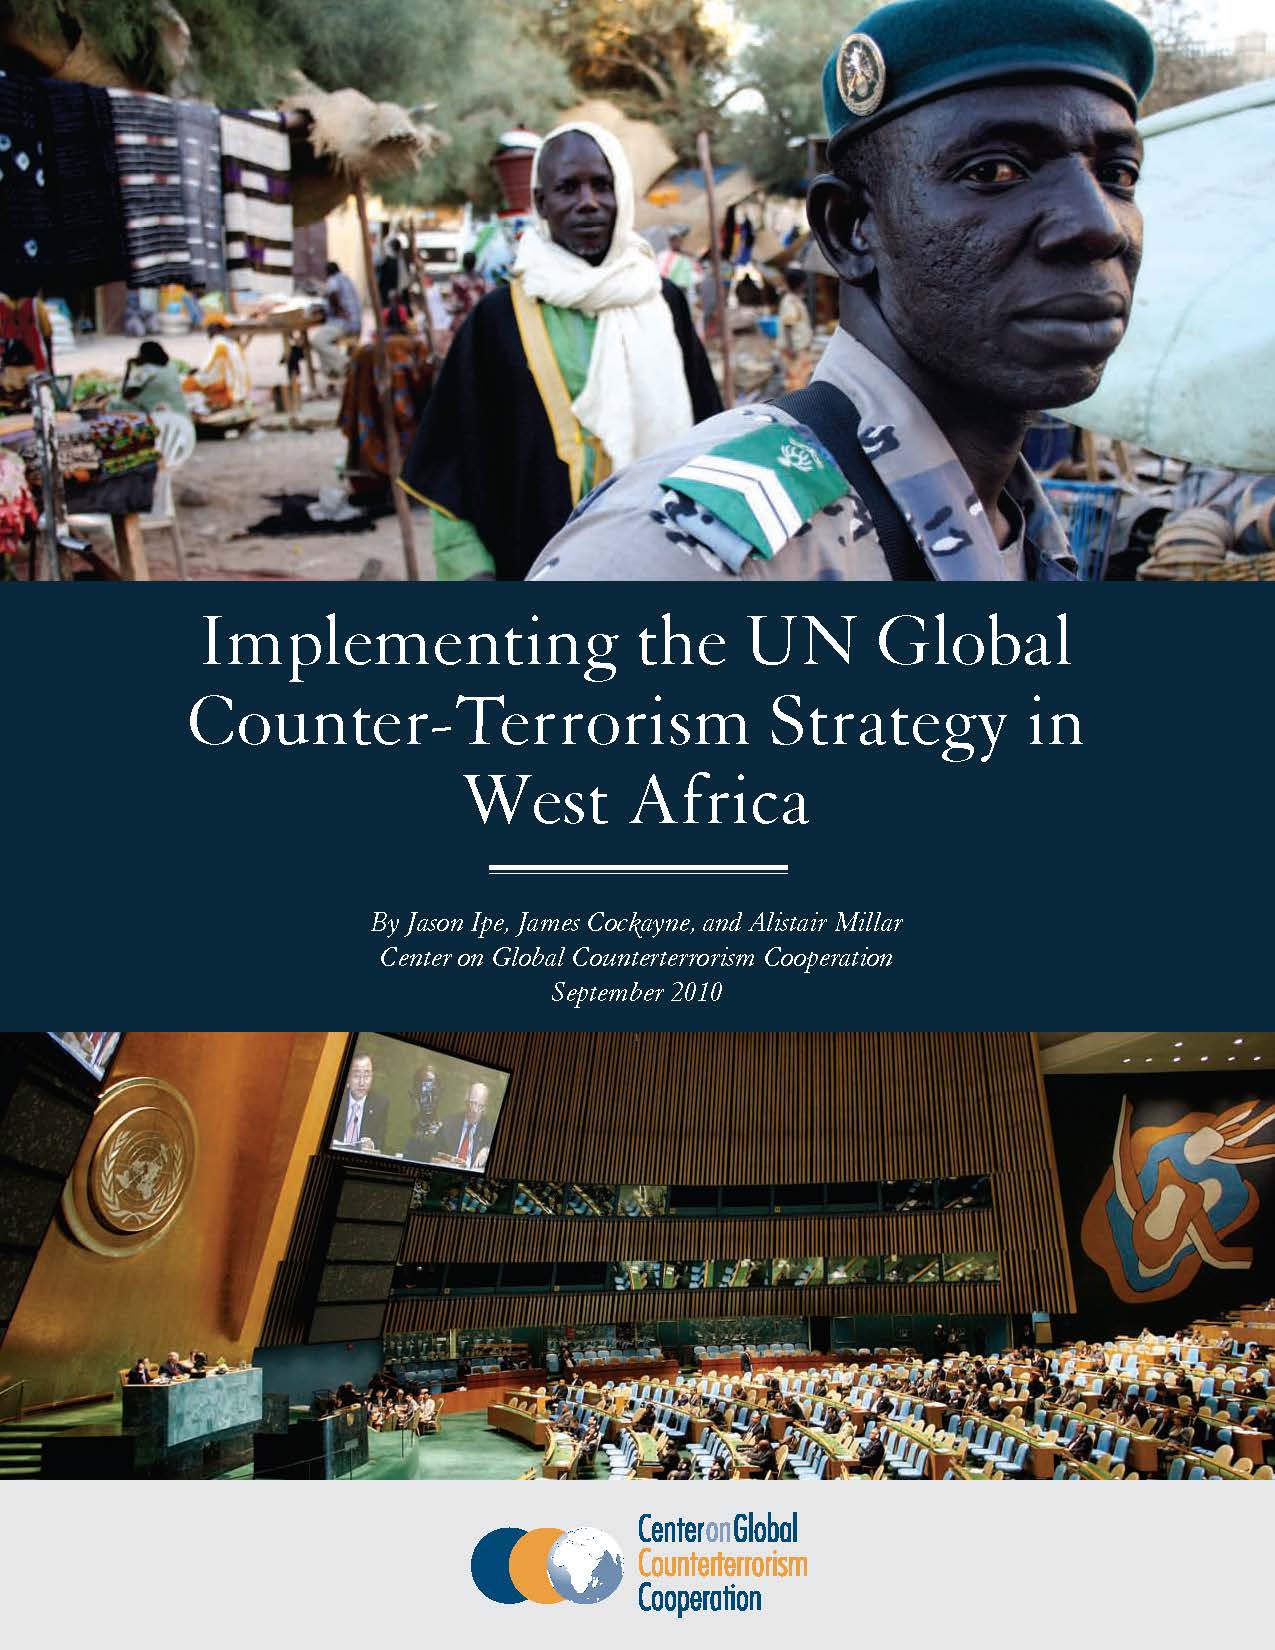 Implementing the UN Global Counter-Terrorism Strategy in West Africa